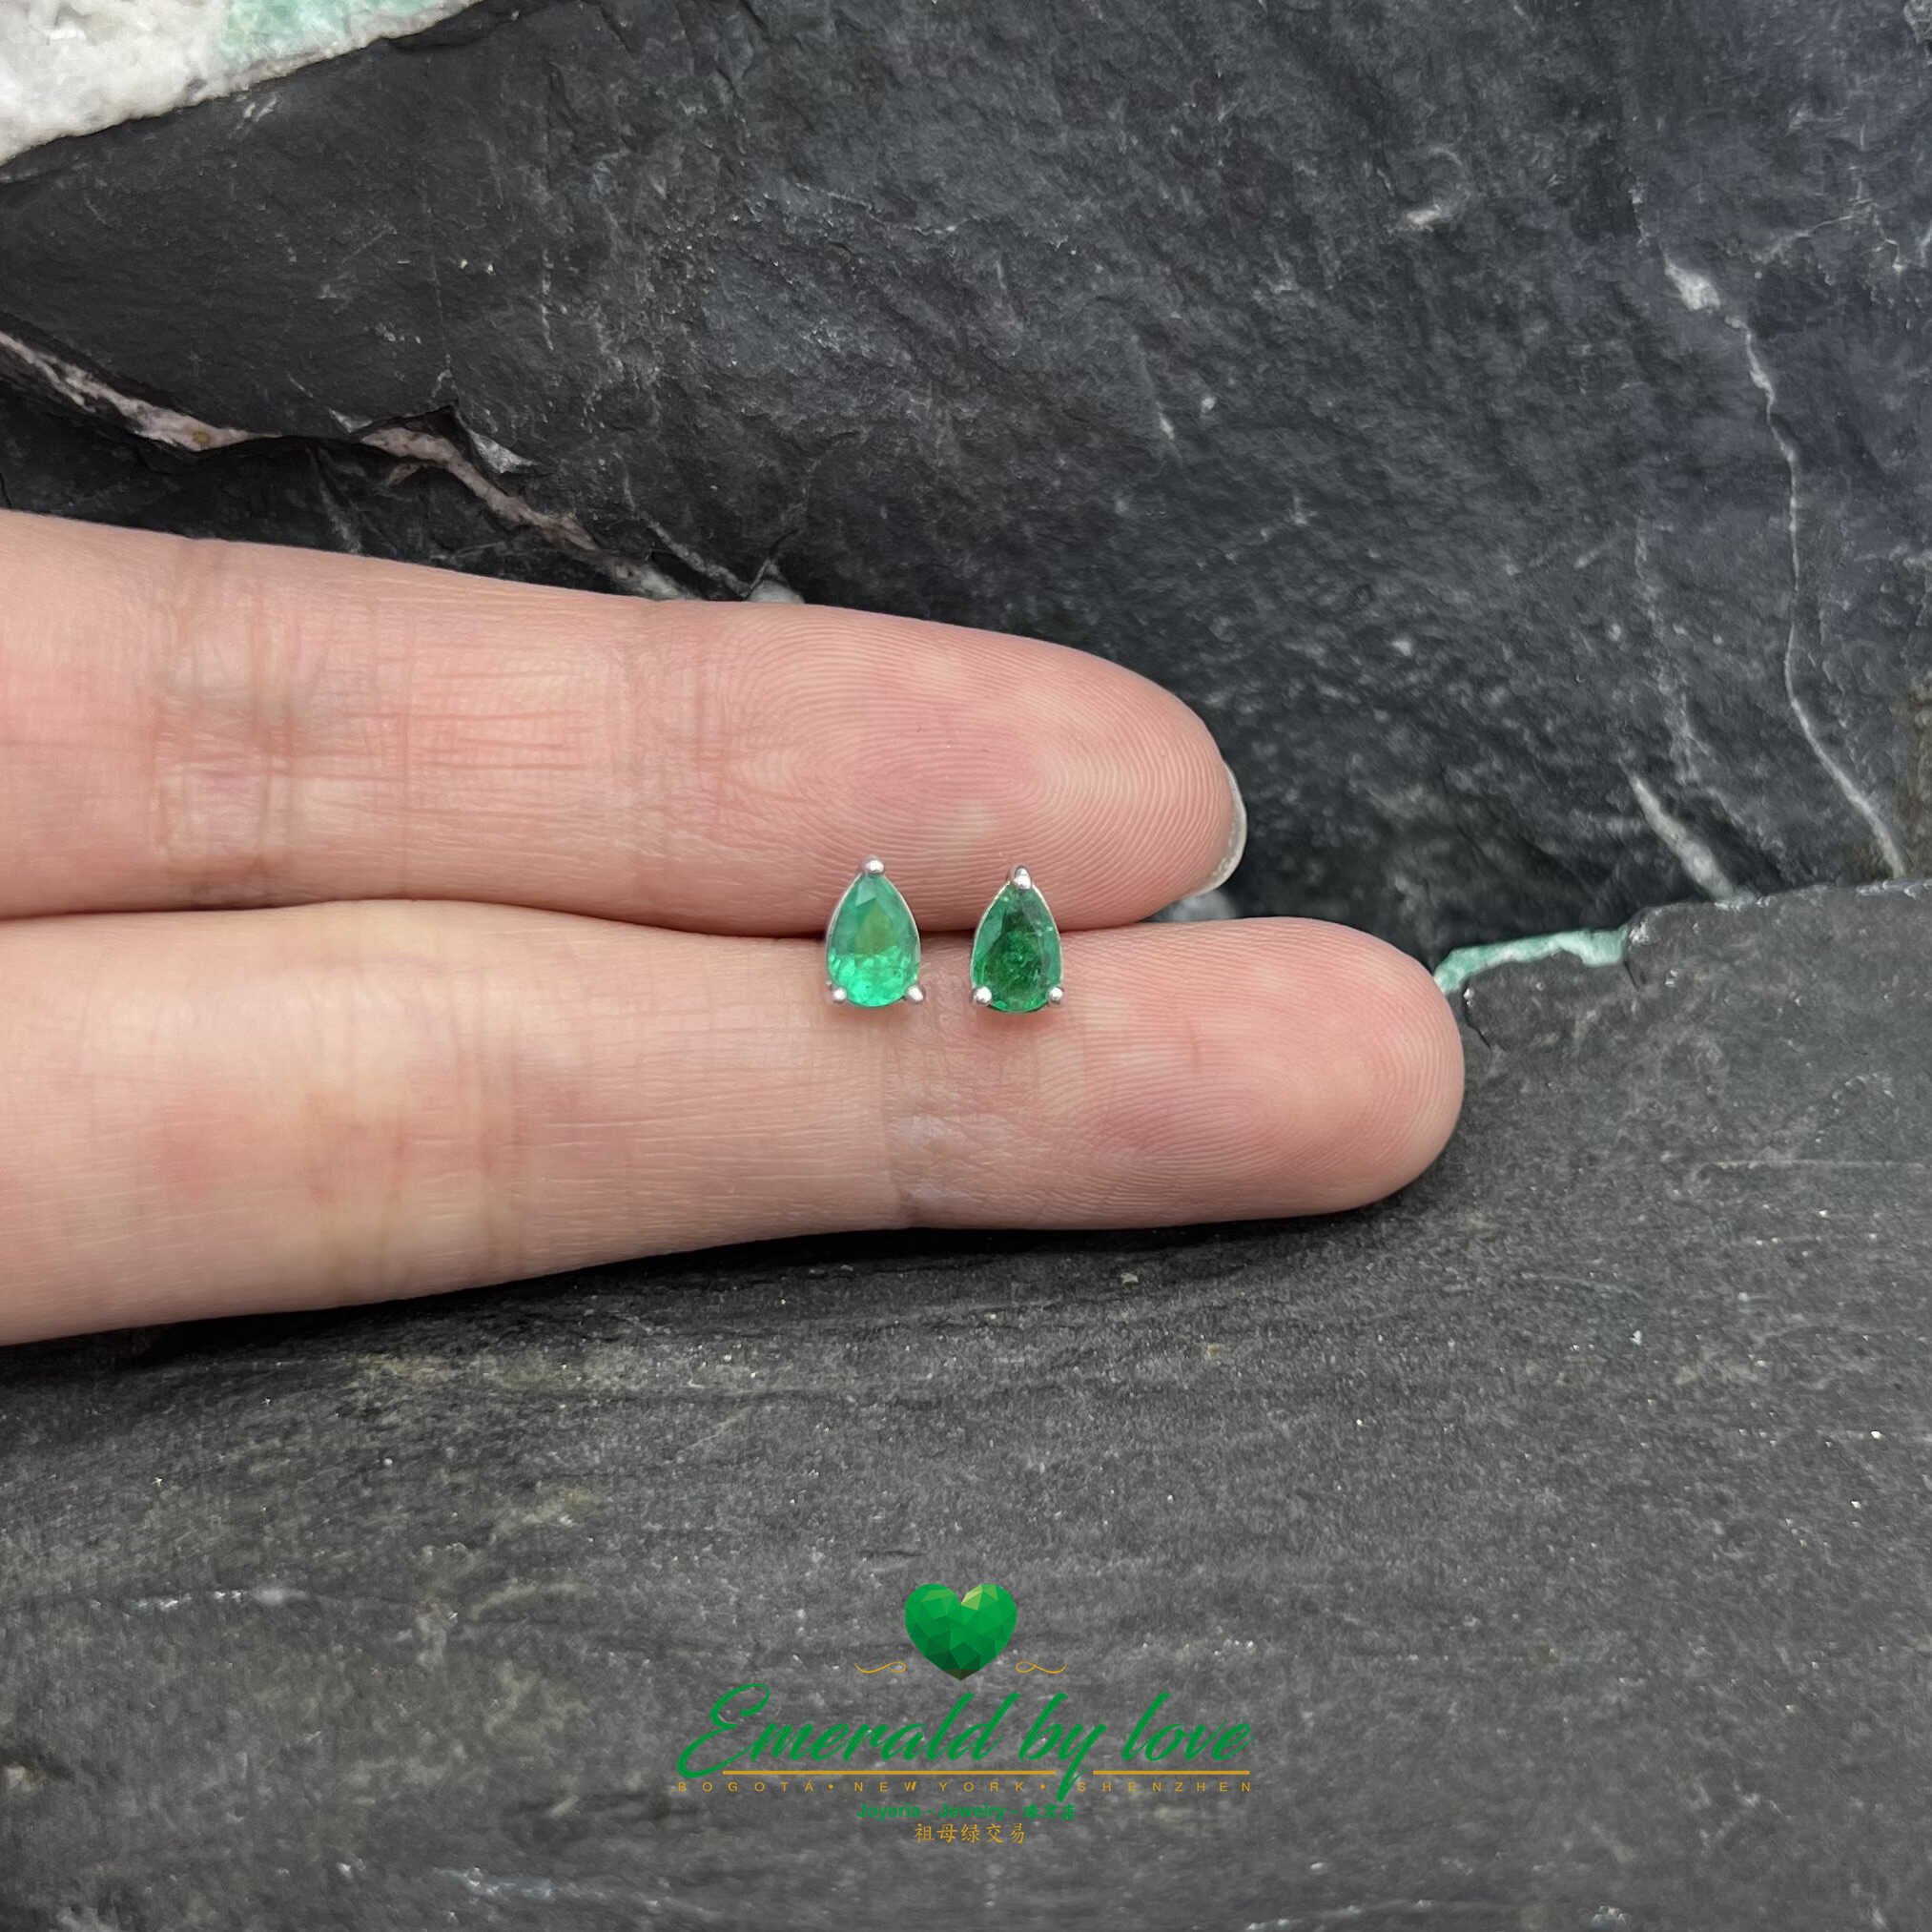 Ethereal Elegance: 18K White Gold Stud Earrings with 0.45 TCW Colombian Emeralds